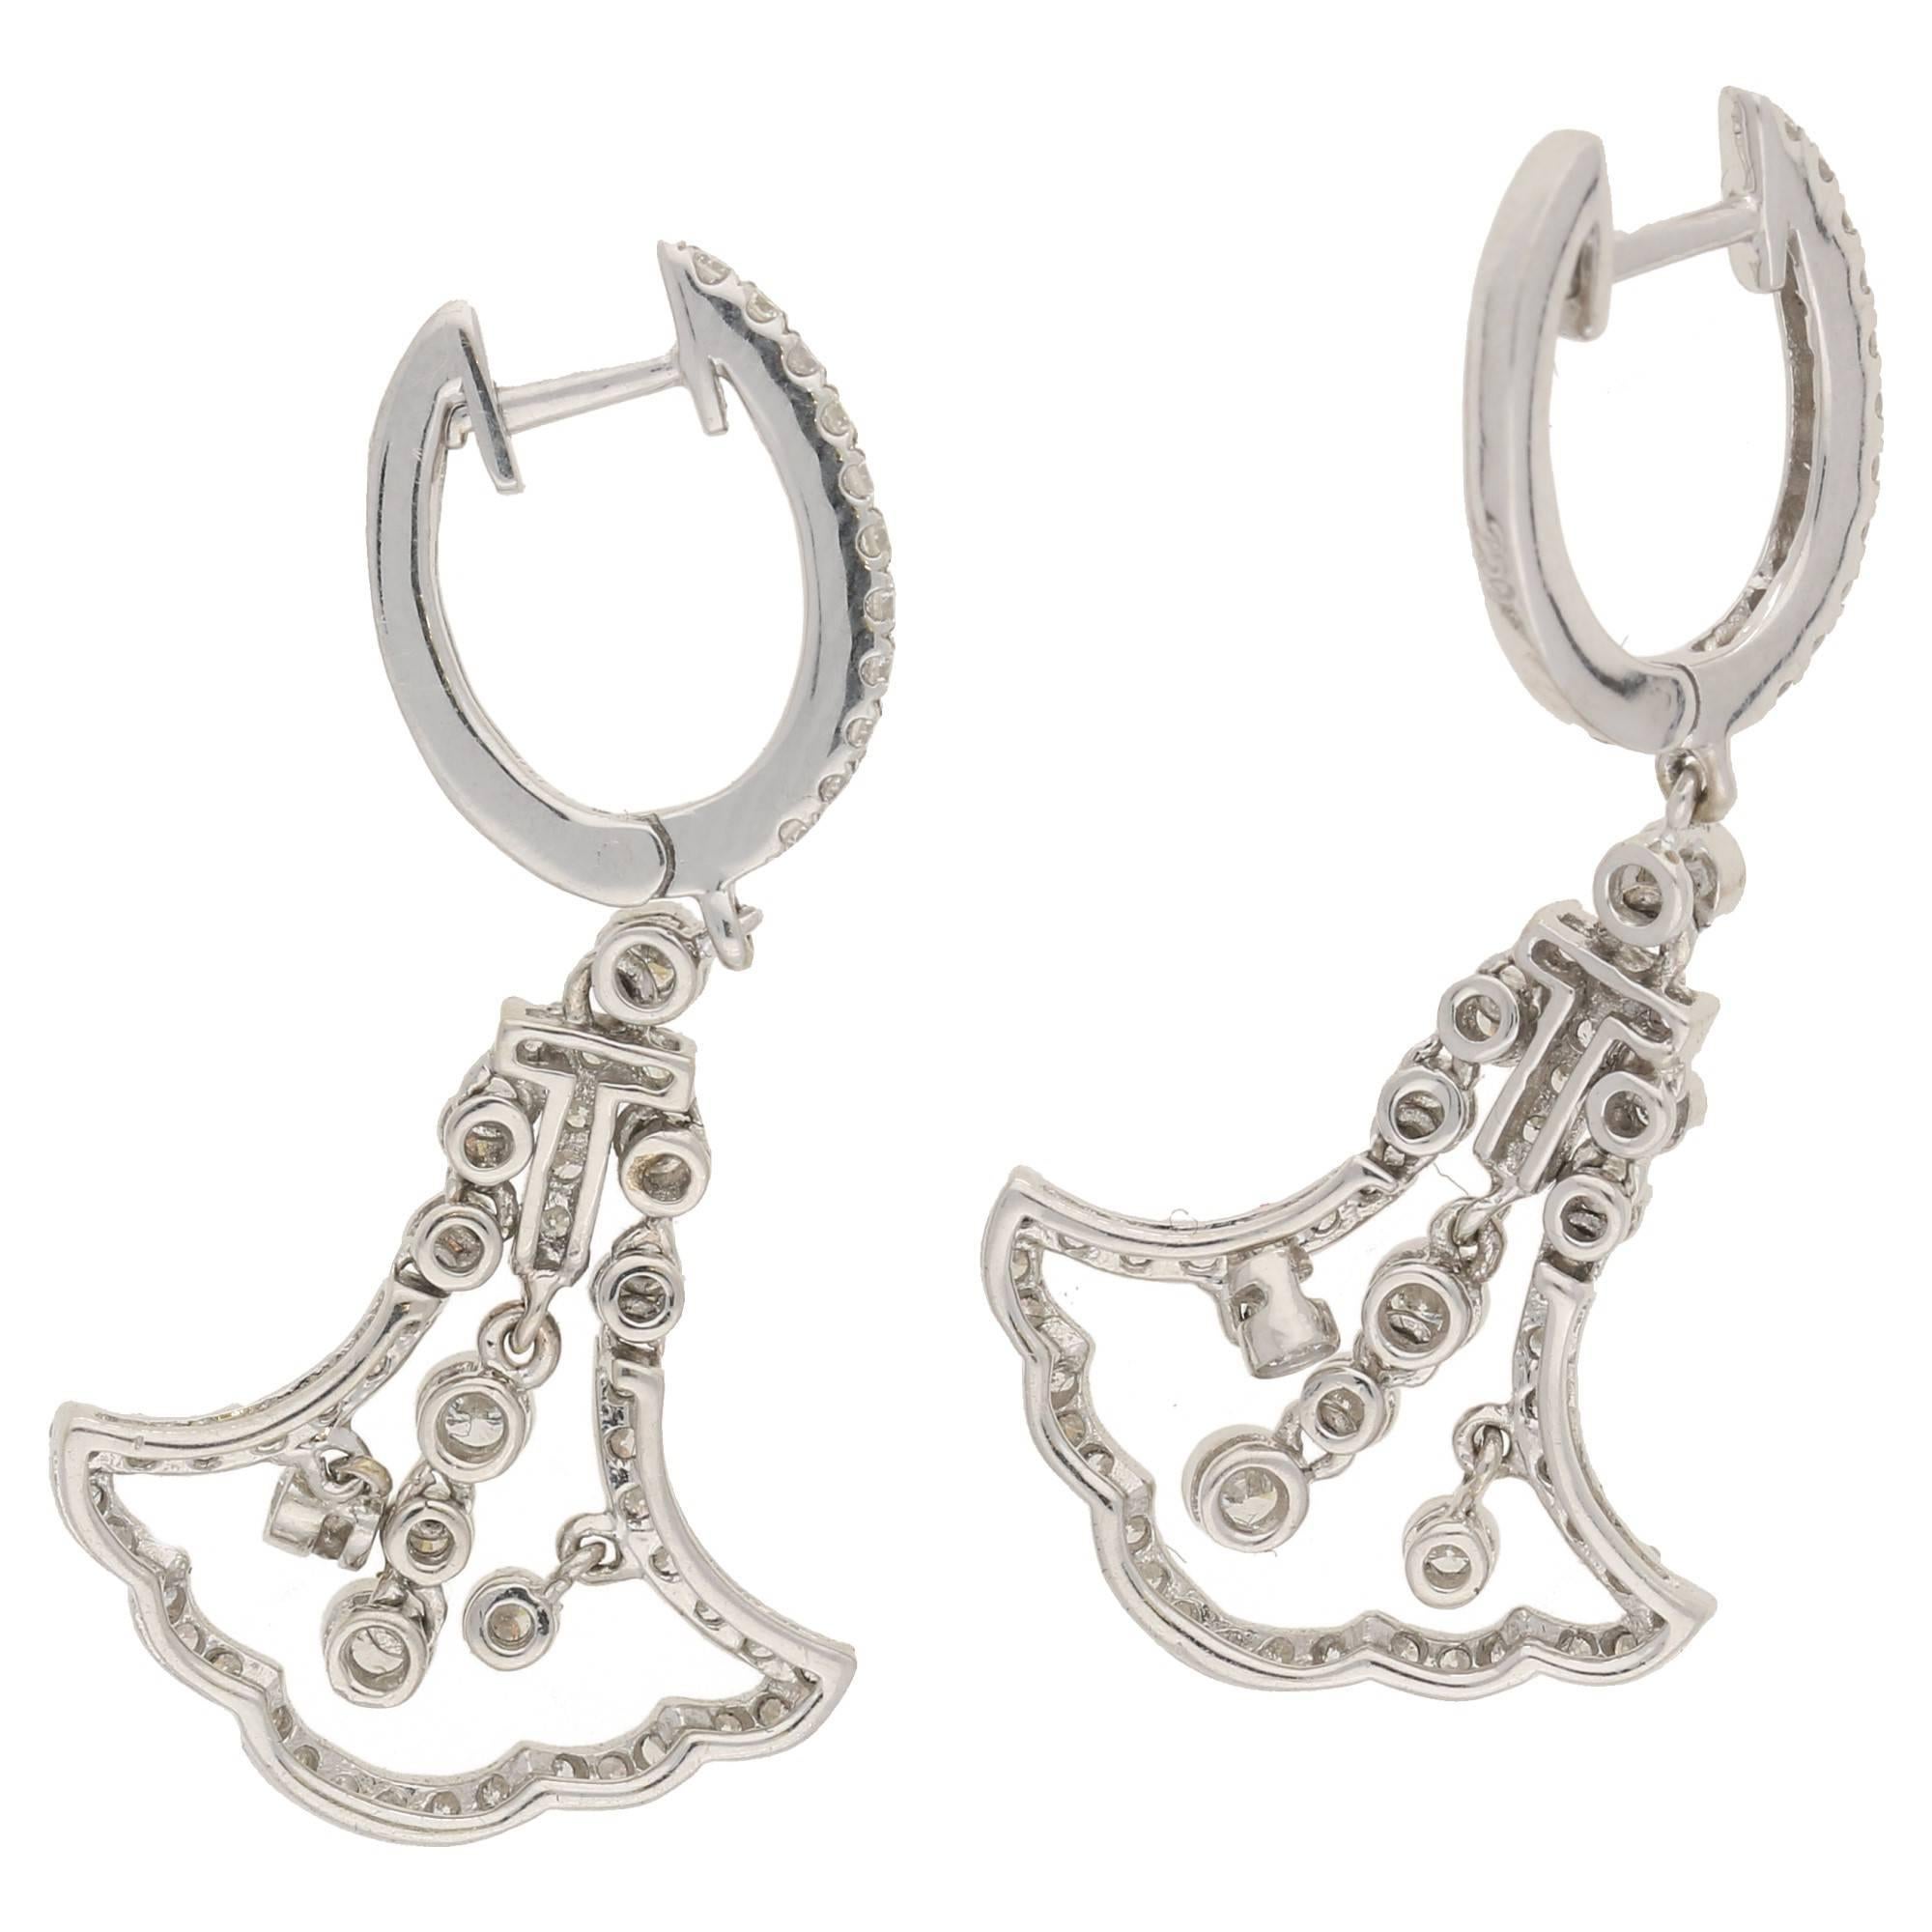 Fine pair of round brilliant diamond set drop earrings, in 18k white gold. These earrings are set with 114 diamonds in total, of approximately 0.86cts in diamond weight in total. The articulation in all sections allow these earrings movement which